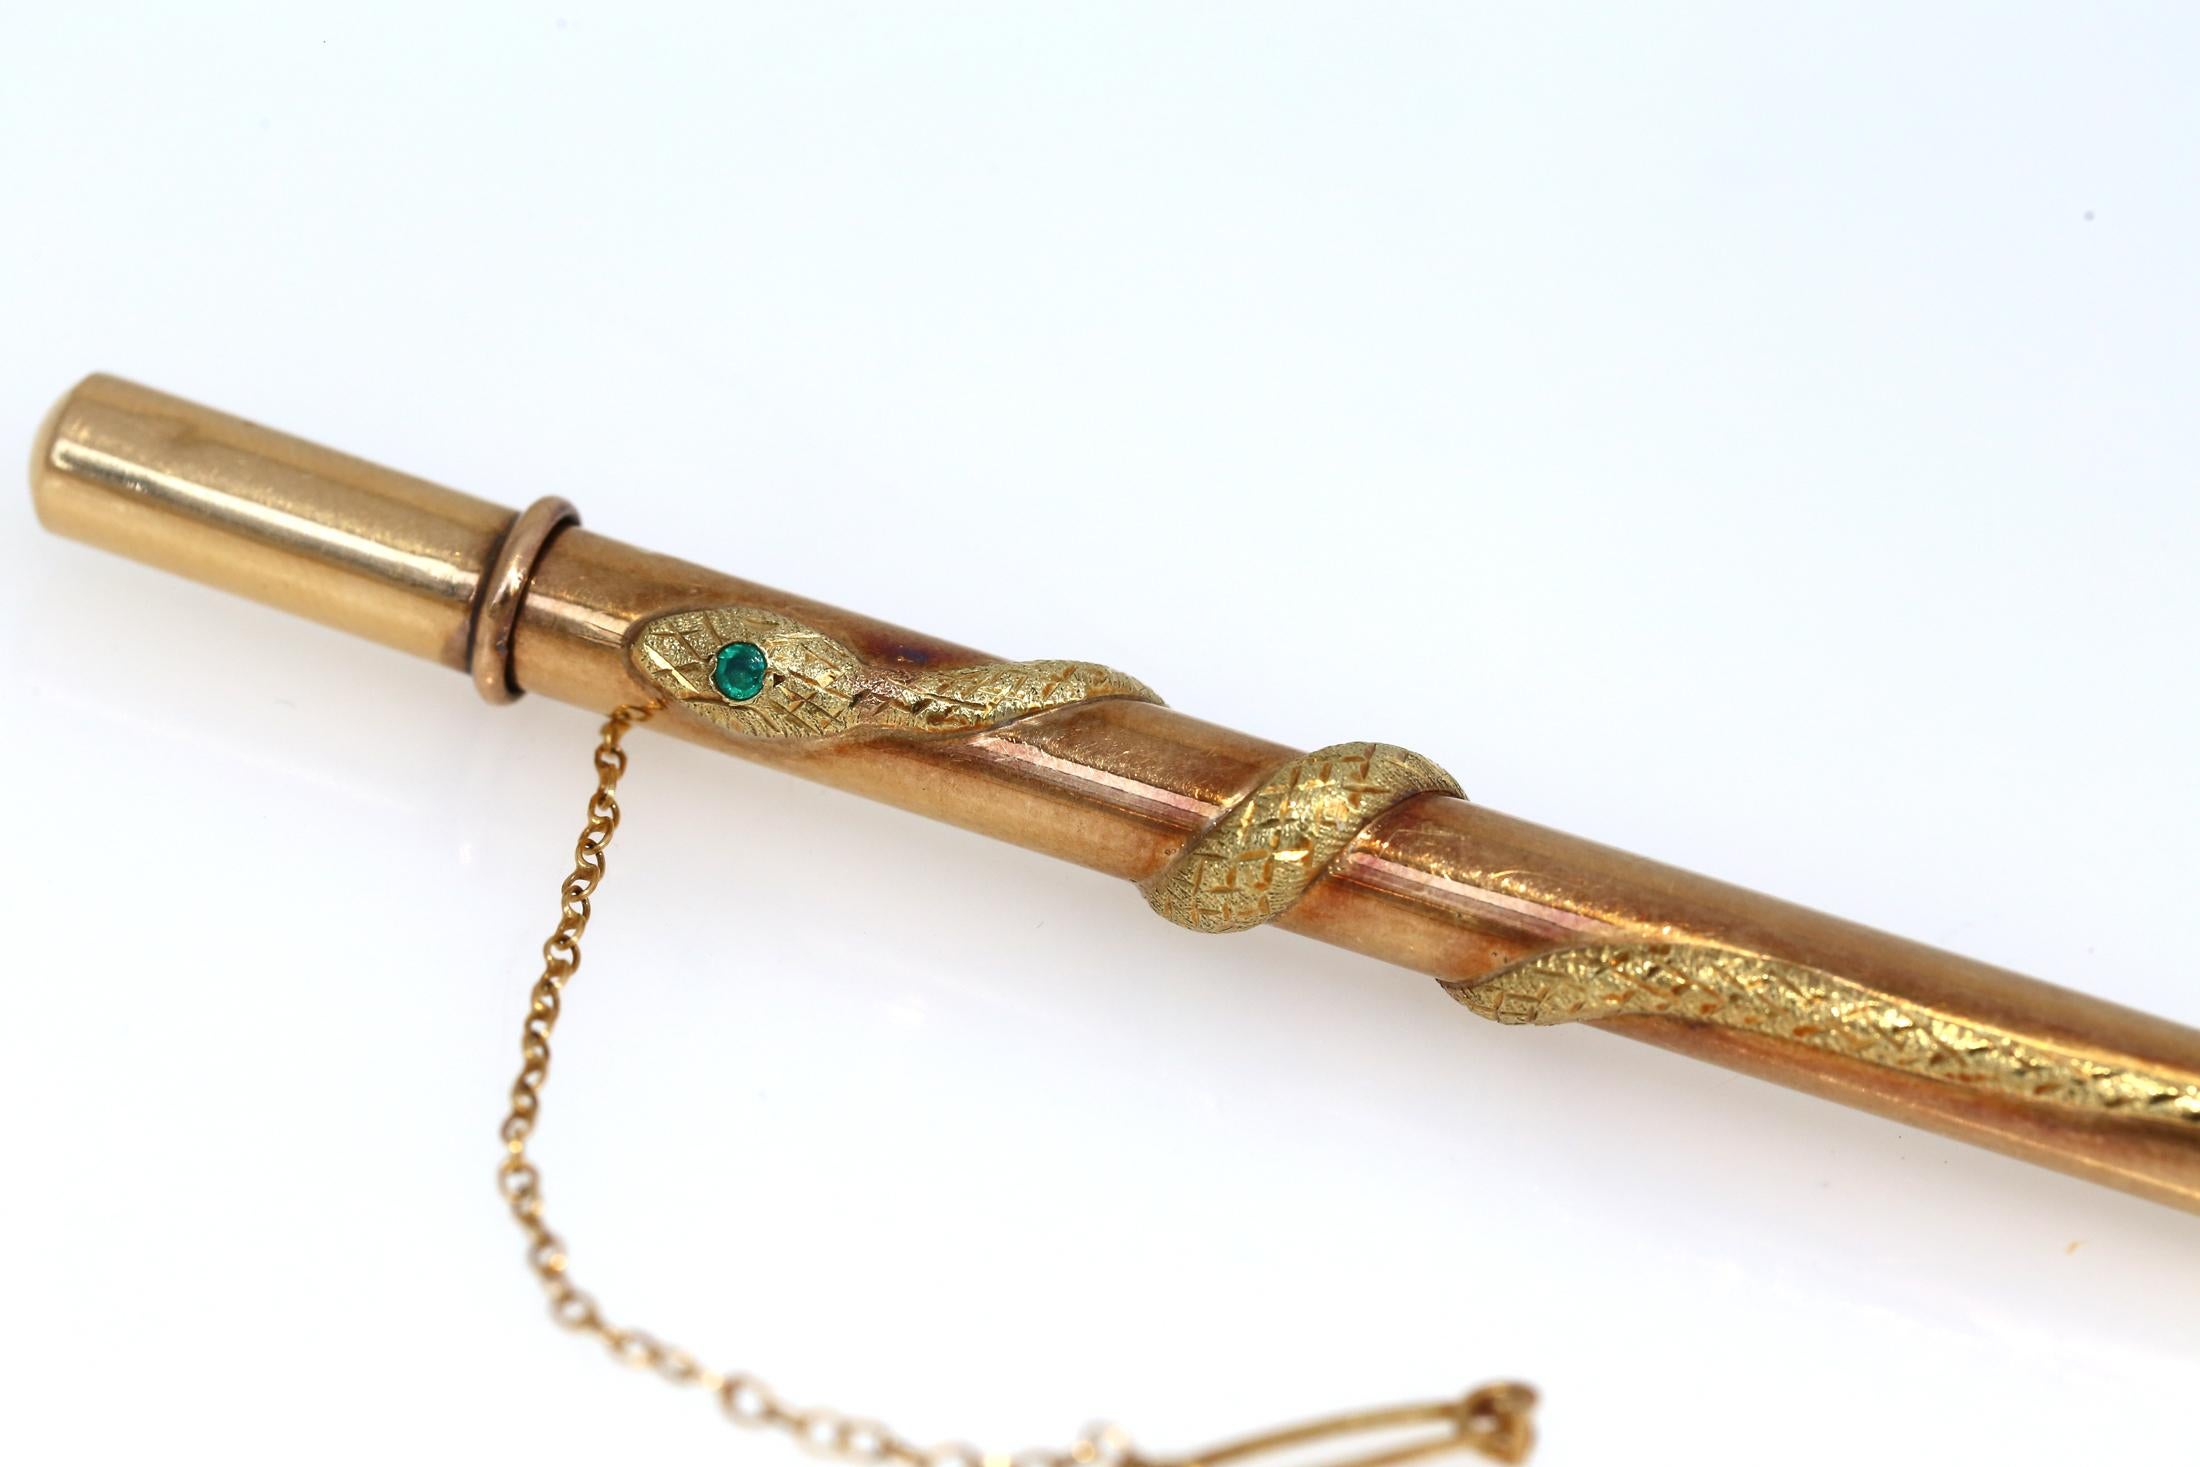 Fine antique example of a Gold pencil case, that was carried on the dress for high society members. Very delicate item, depicting a snake all around the pencil with a fine tiny Emerald. It could be a doctor's item. Has a pin on a chain for security,